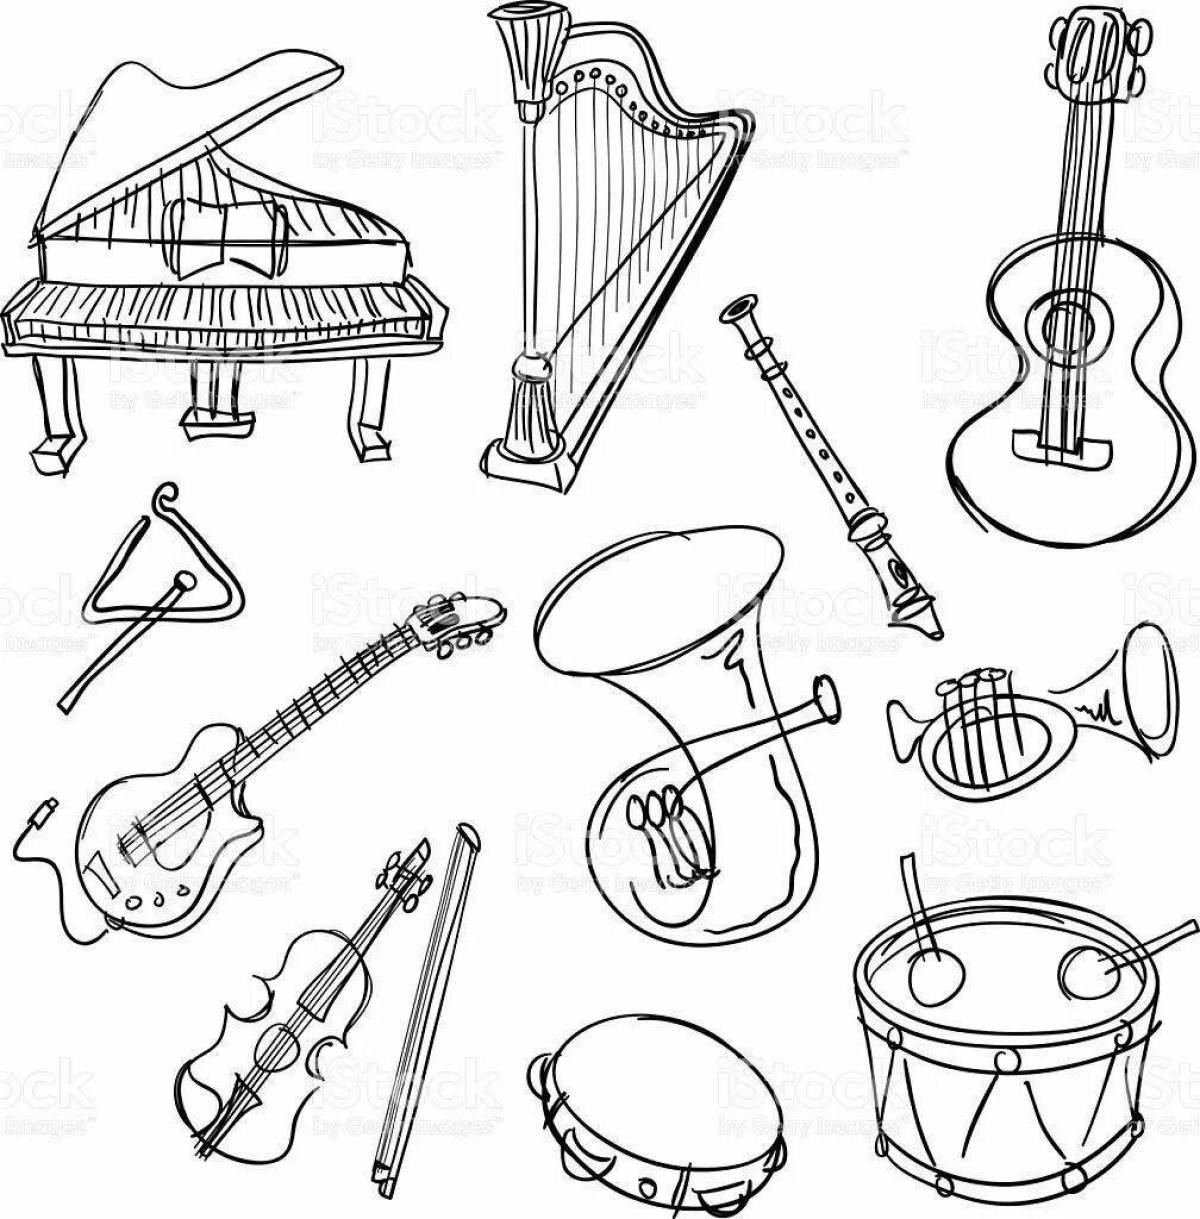 Wonderful orchestra coloring for kids